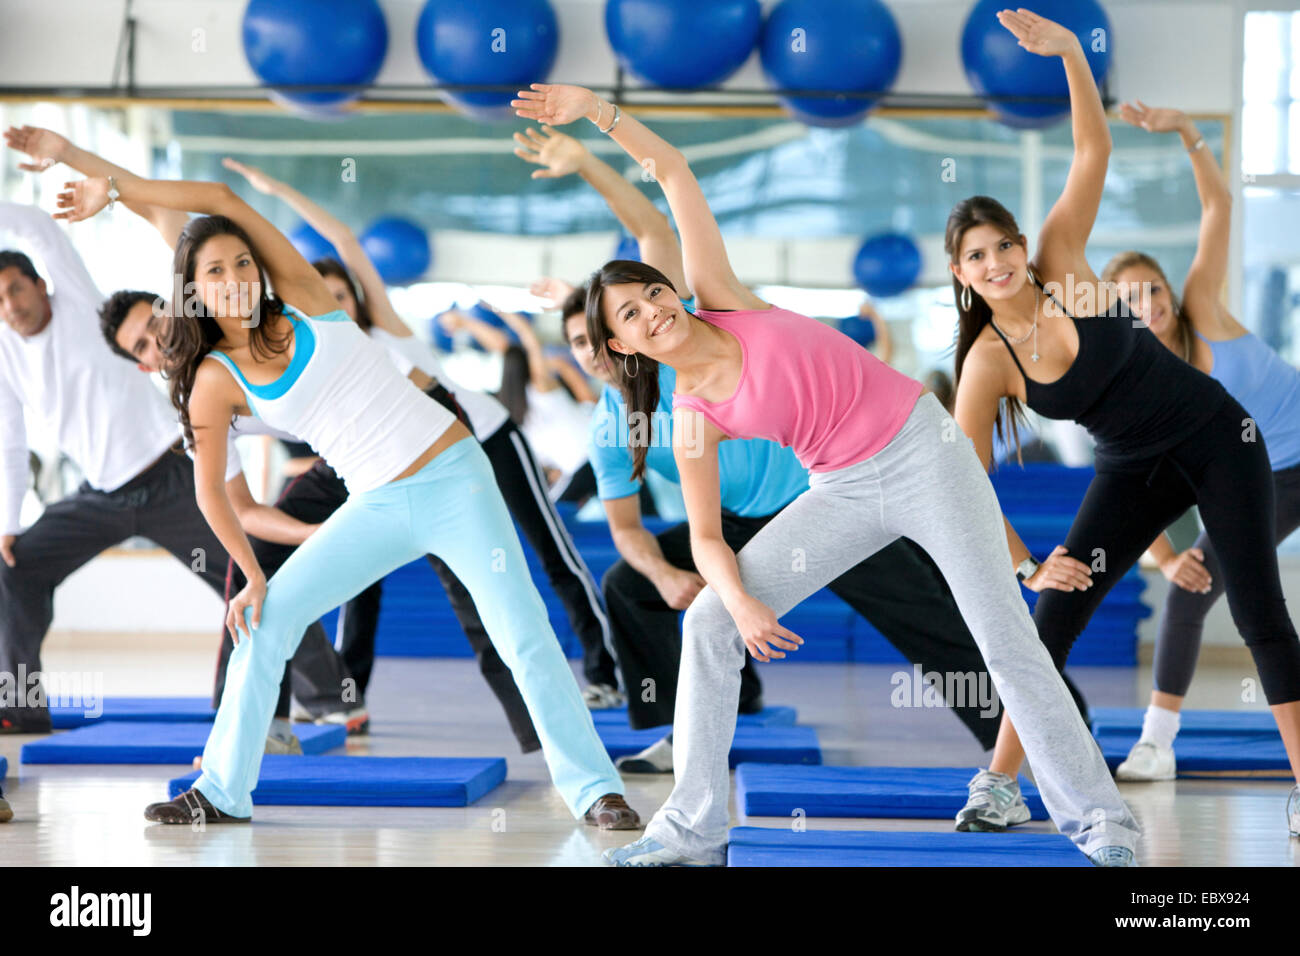 group of gym people in an aerobics class Stock Photo